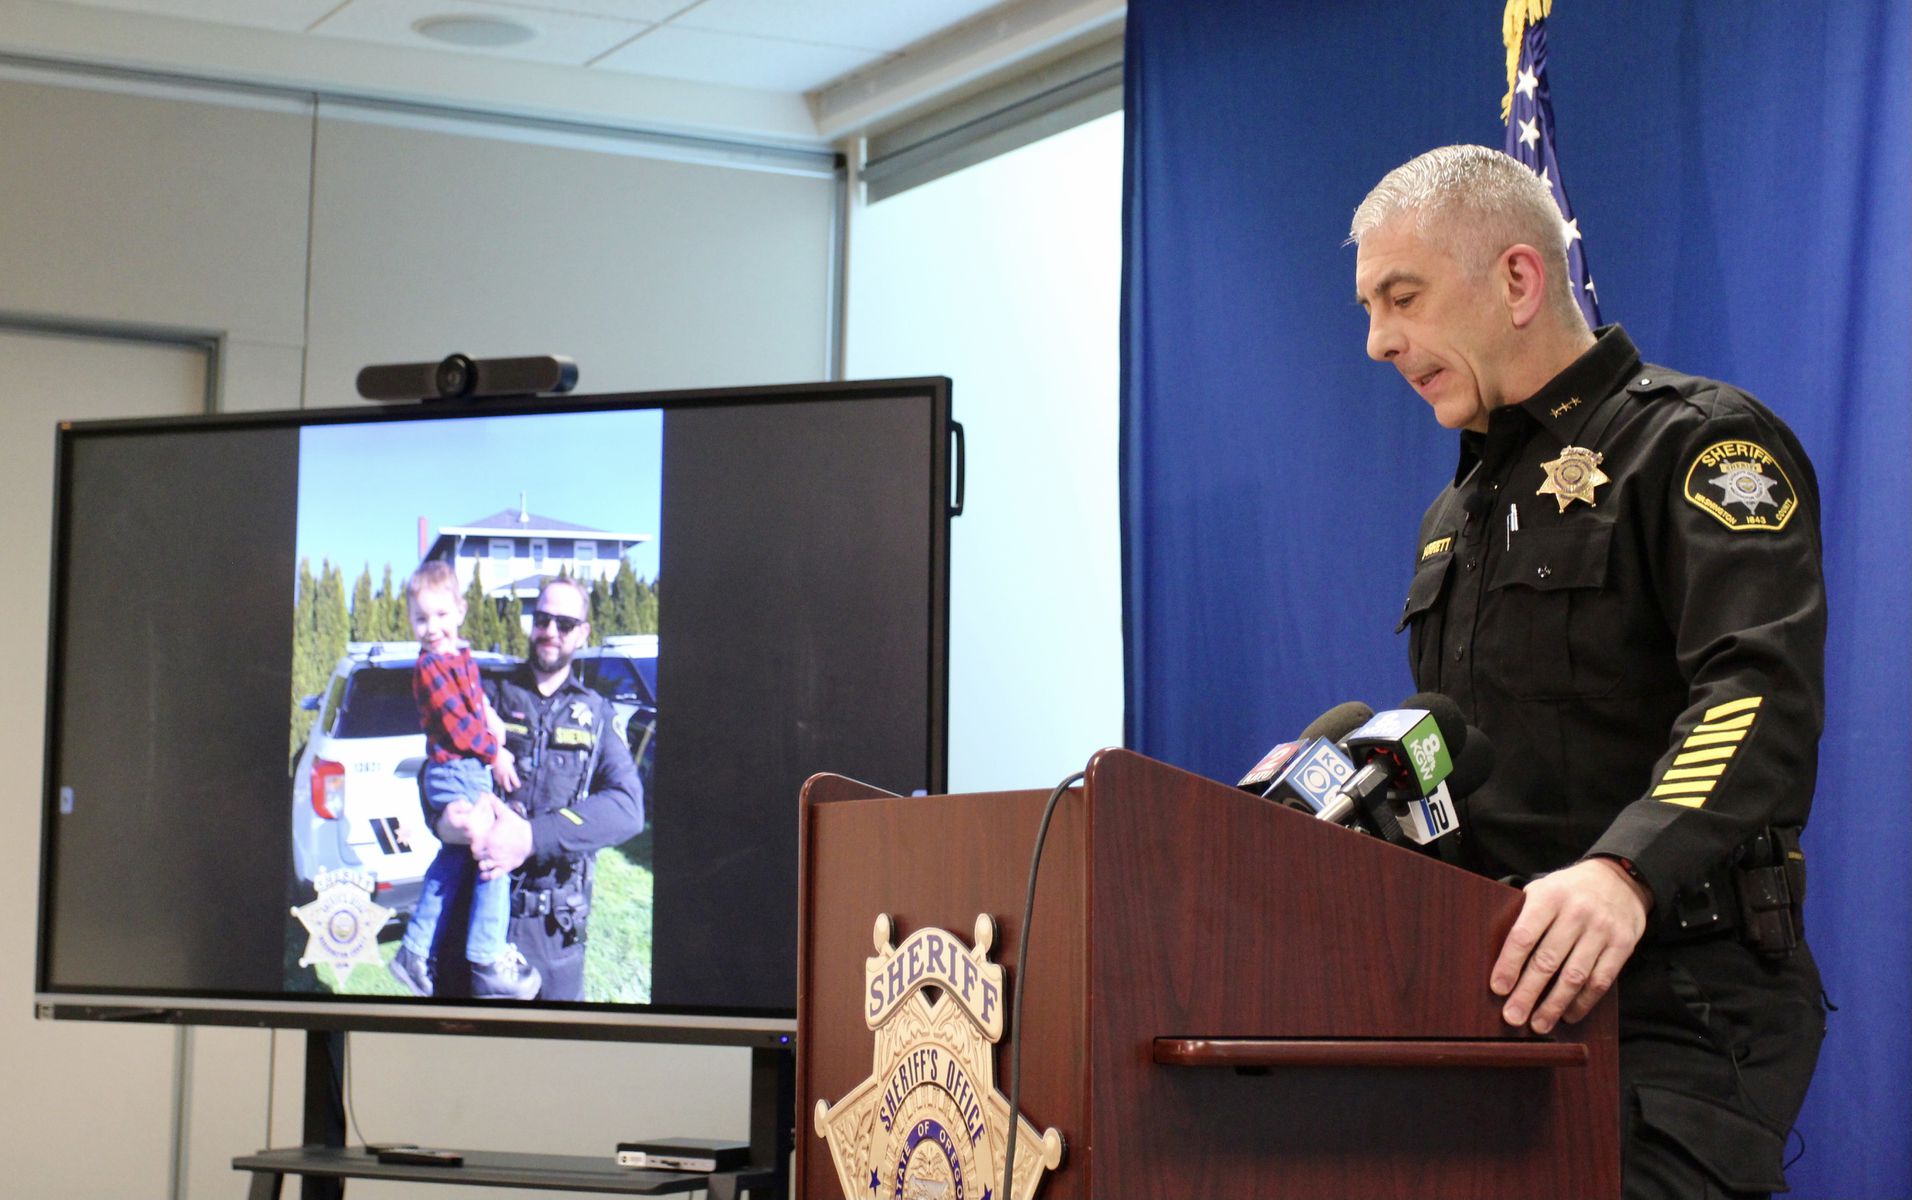 Washington County Sheriff Pat Garrett called for a moment of silence while displaying a photo of critically-injured deputy Michael Trotter during a press conference on Wednesday, April 27, 2022.